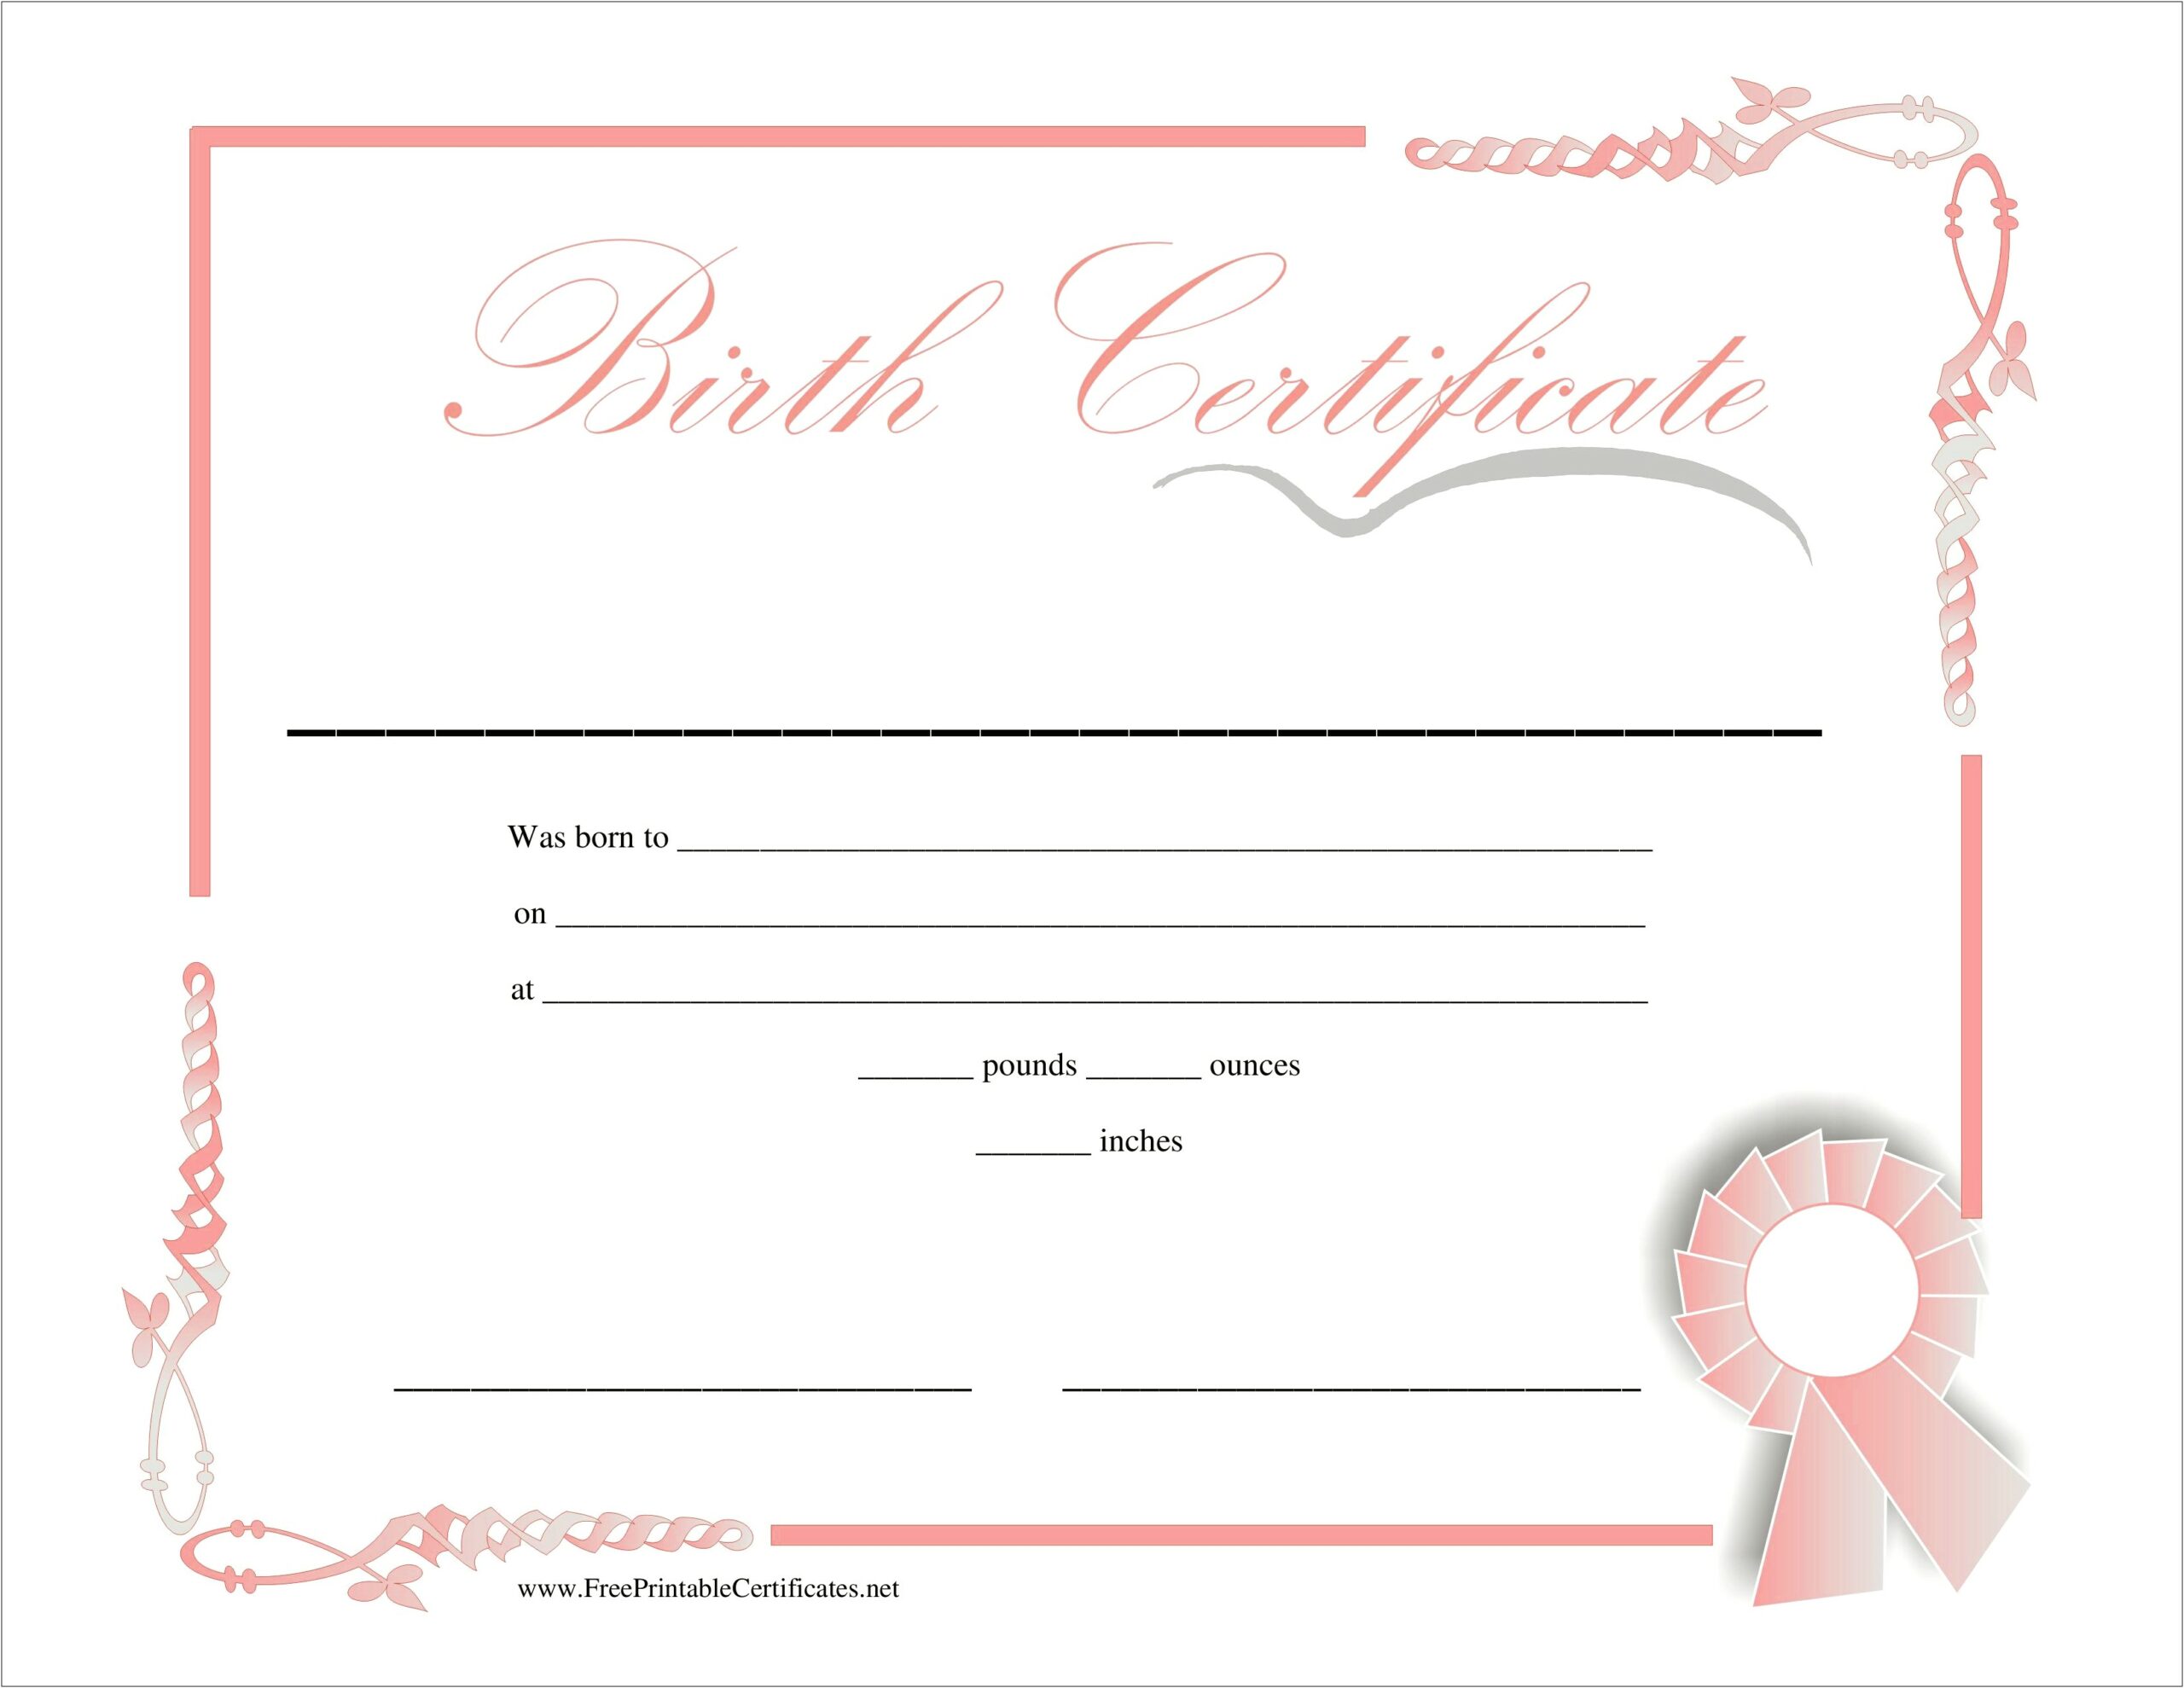 Birth Certificate Templates For Microsoft Word